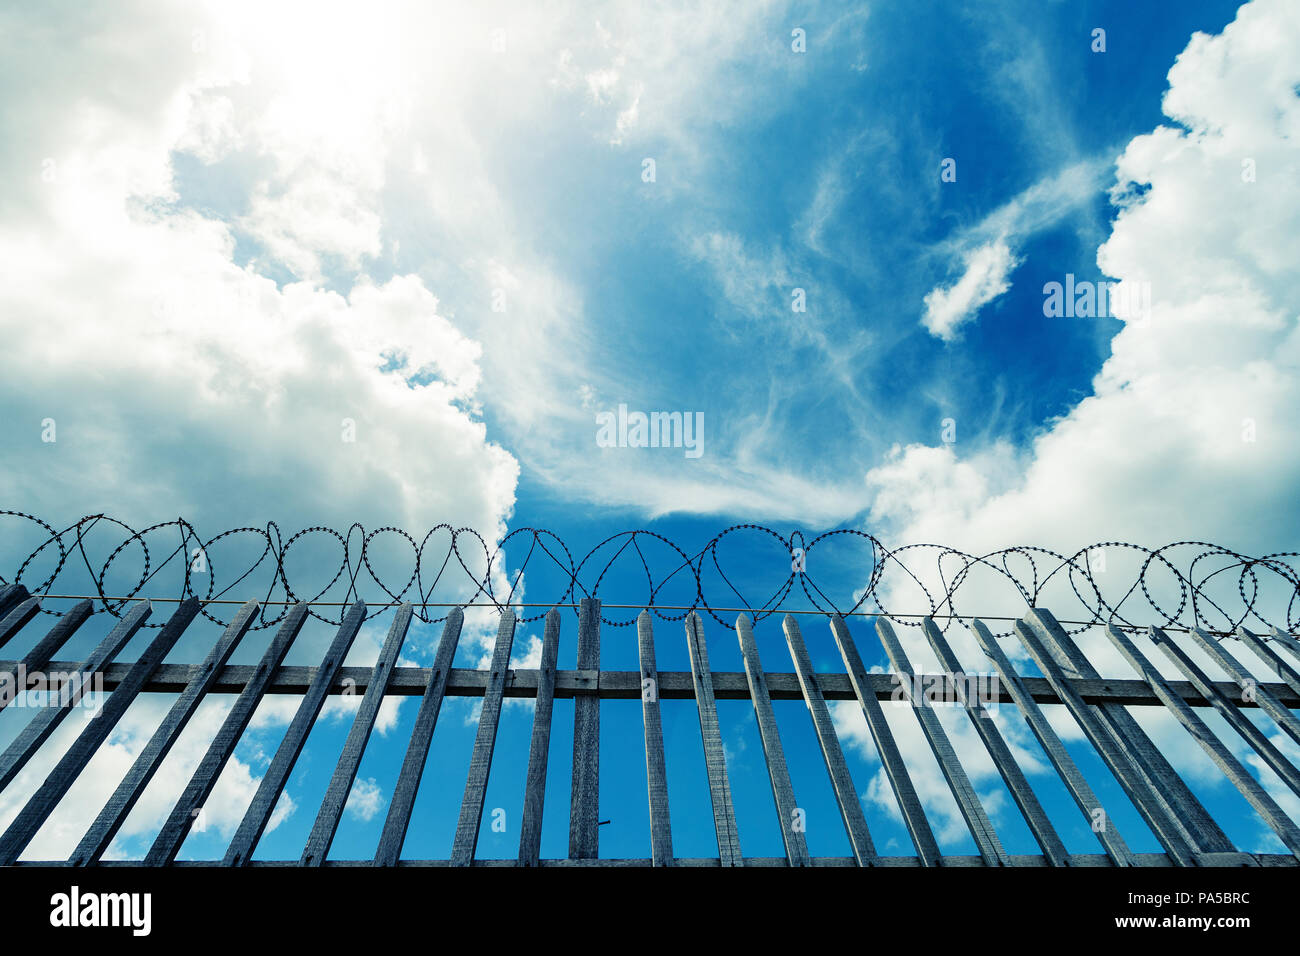 Barbed wire fence surrounding a prison , military or other high security complex. Stock Photo